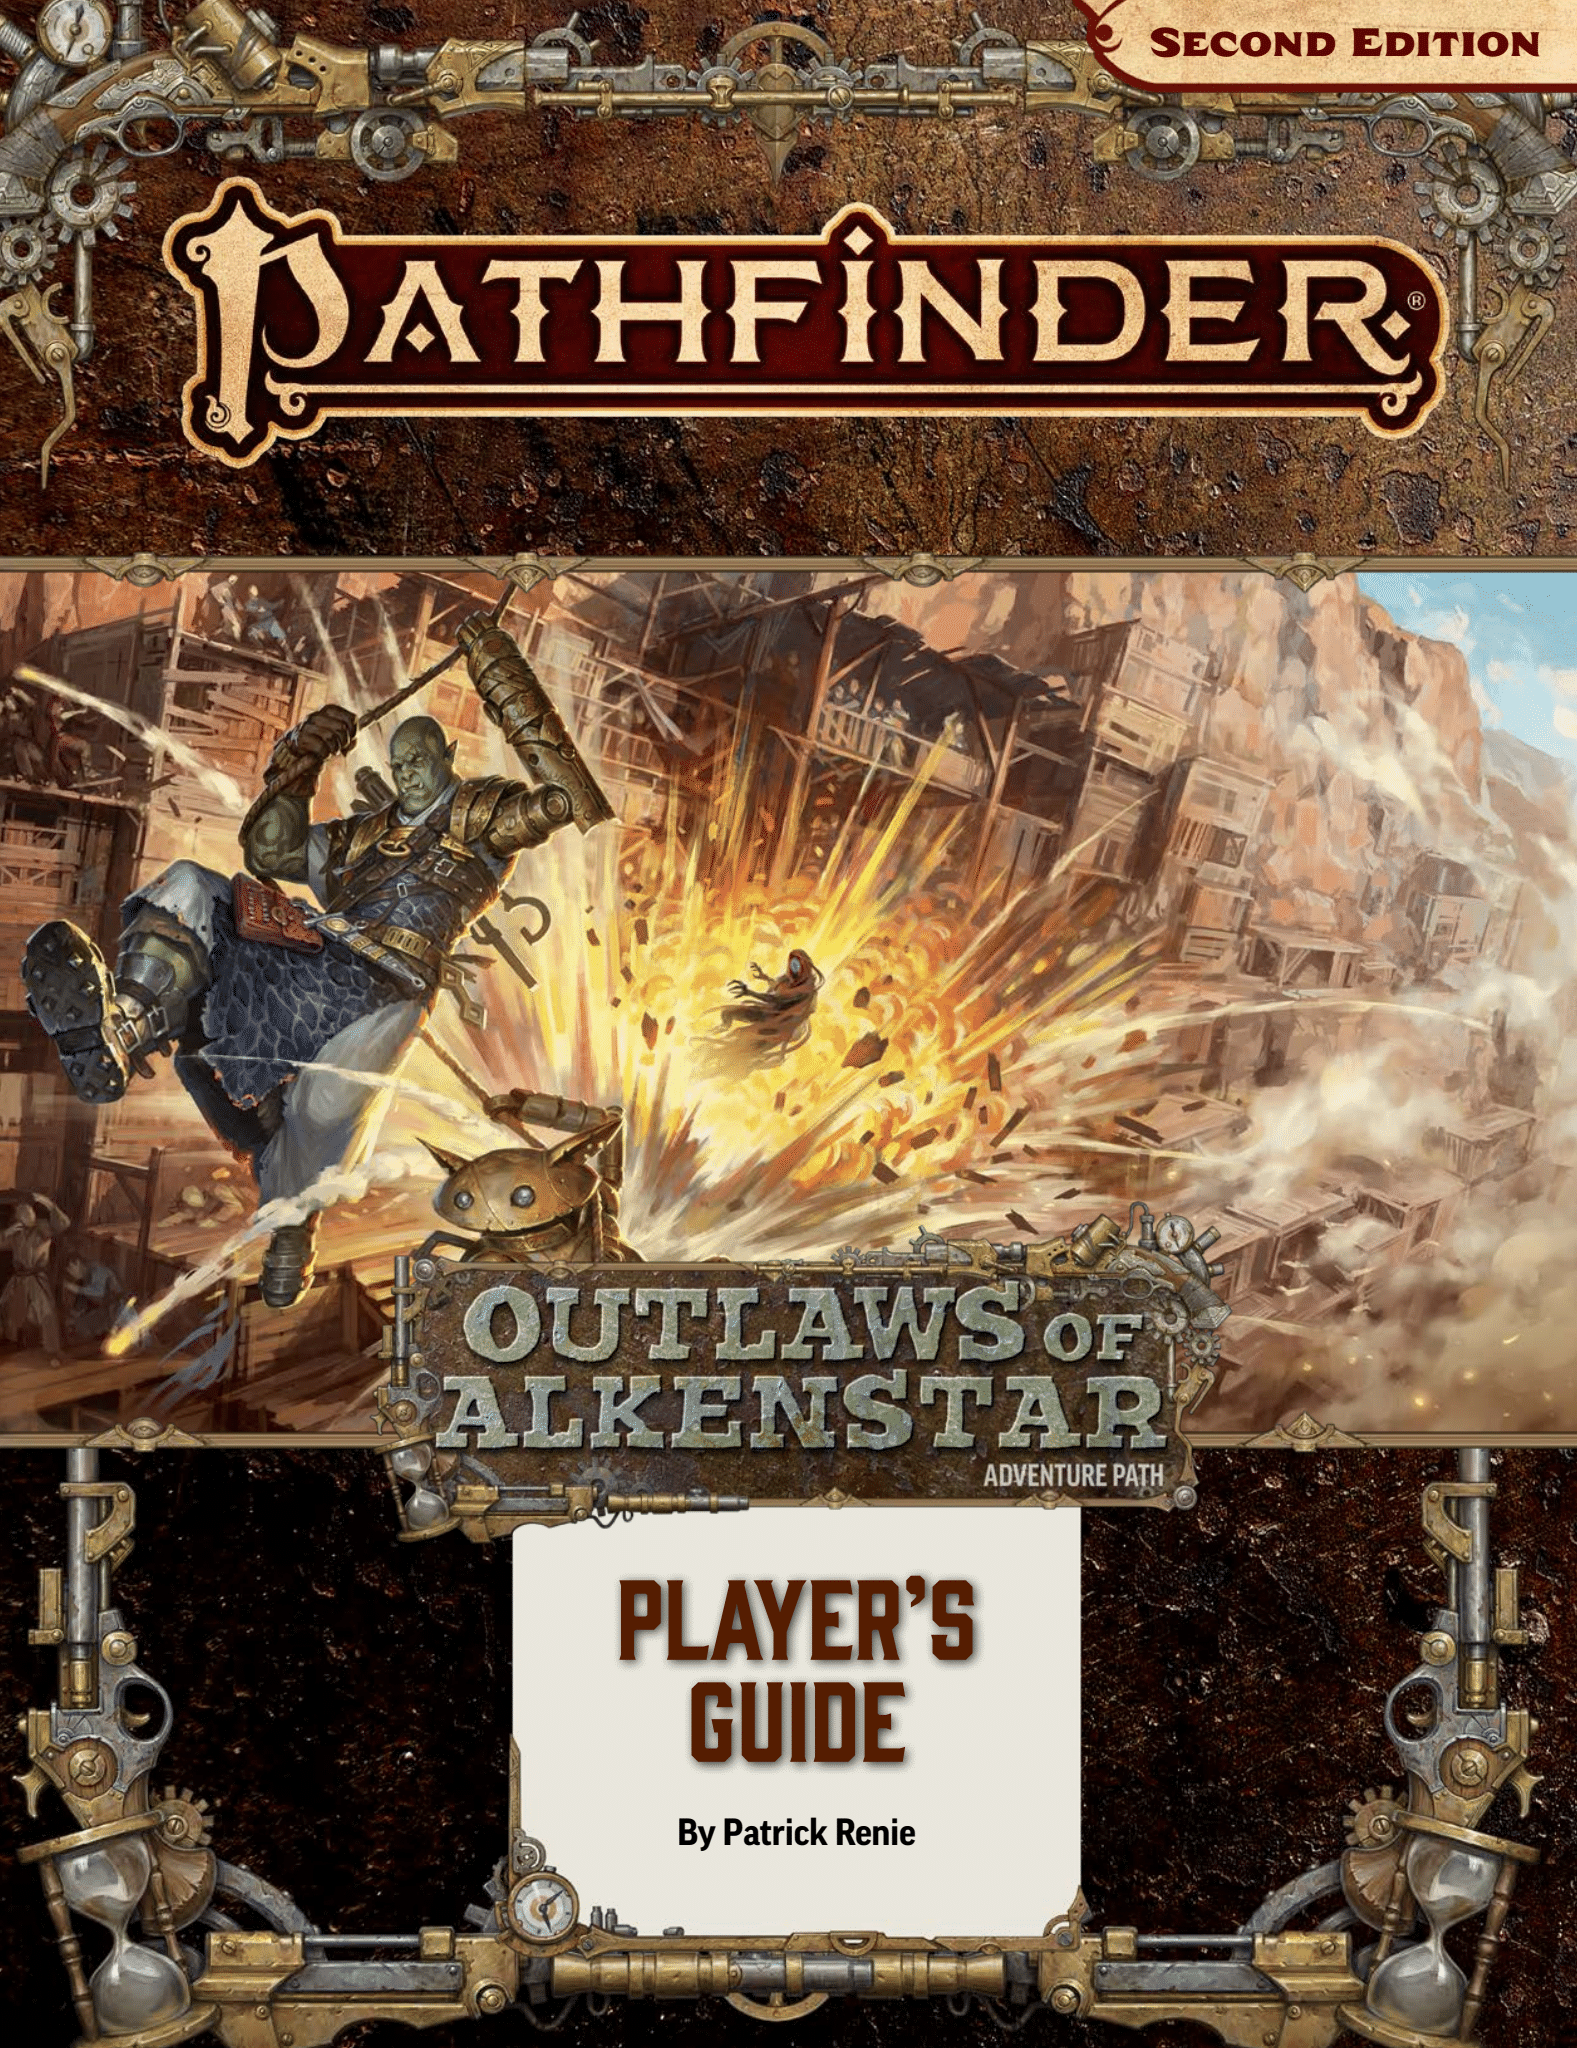 Outlaws of Alkenstar Player's Guide Cover featuring the iconic inventor, Droven and their automaton, Whirp jumping away from an explosion